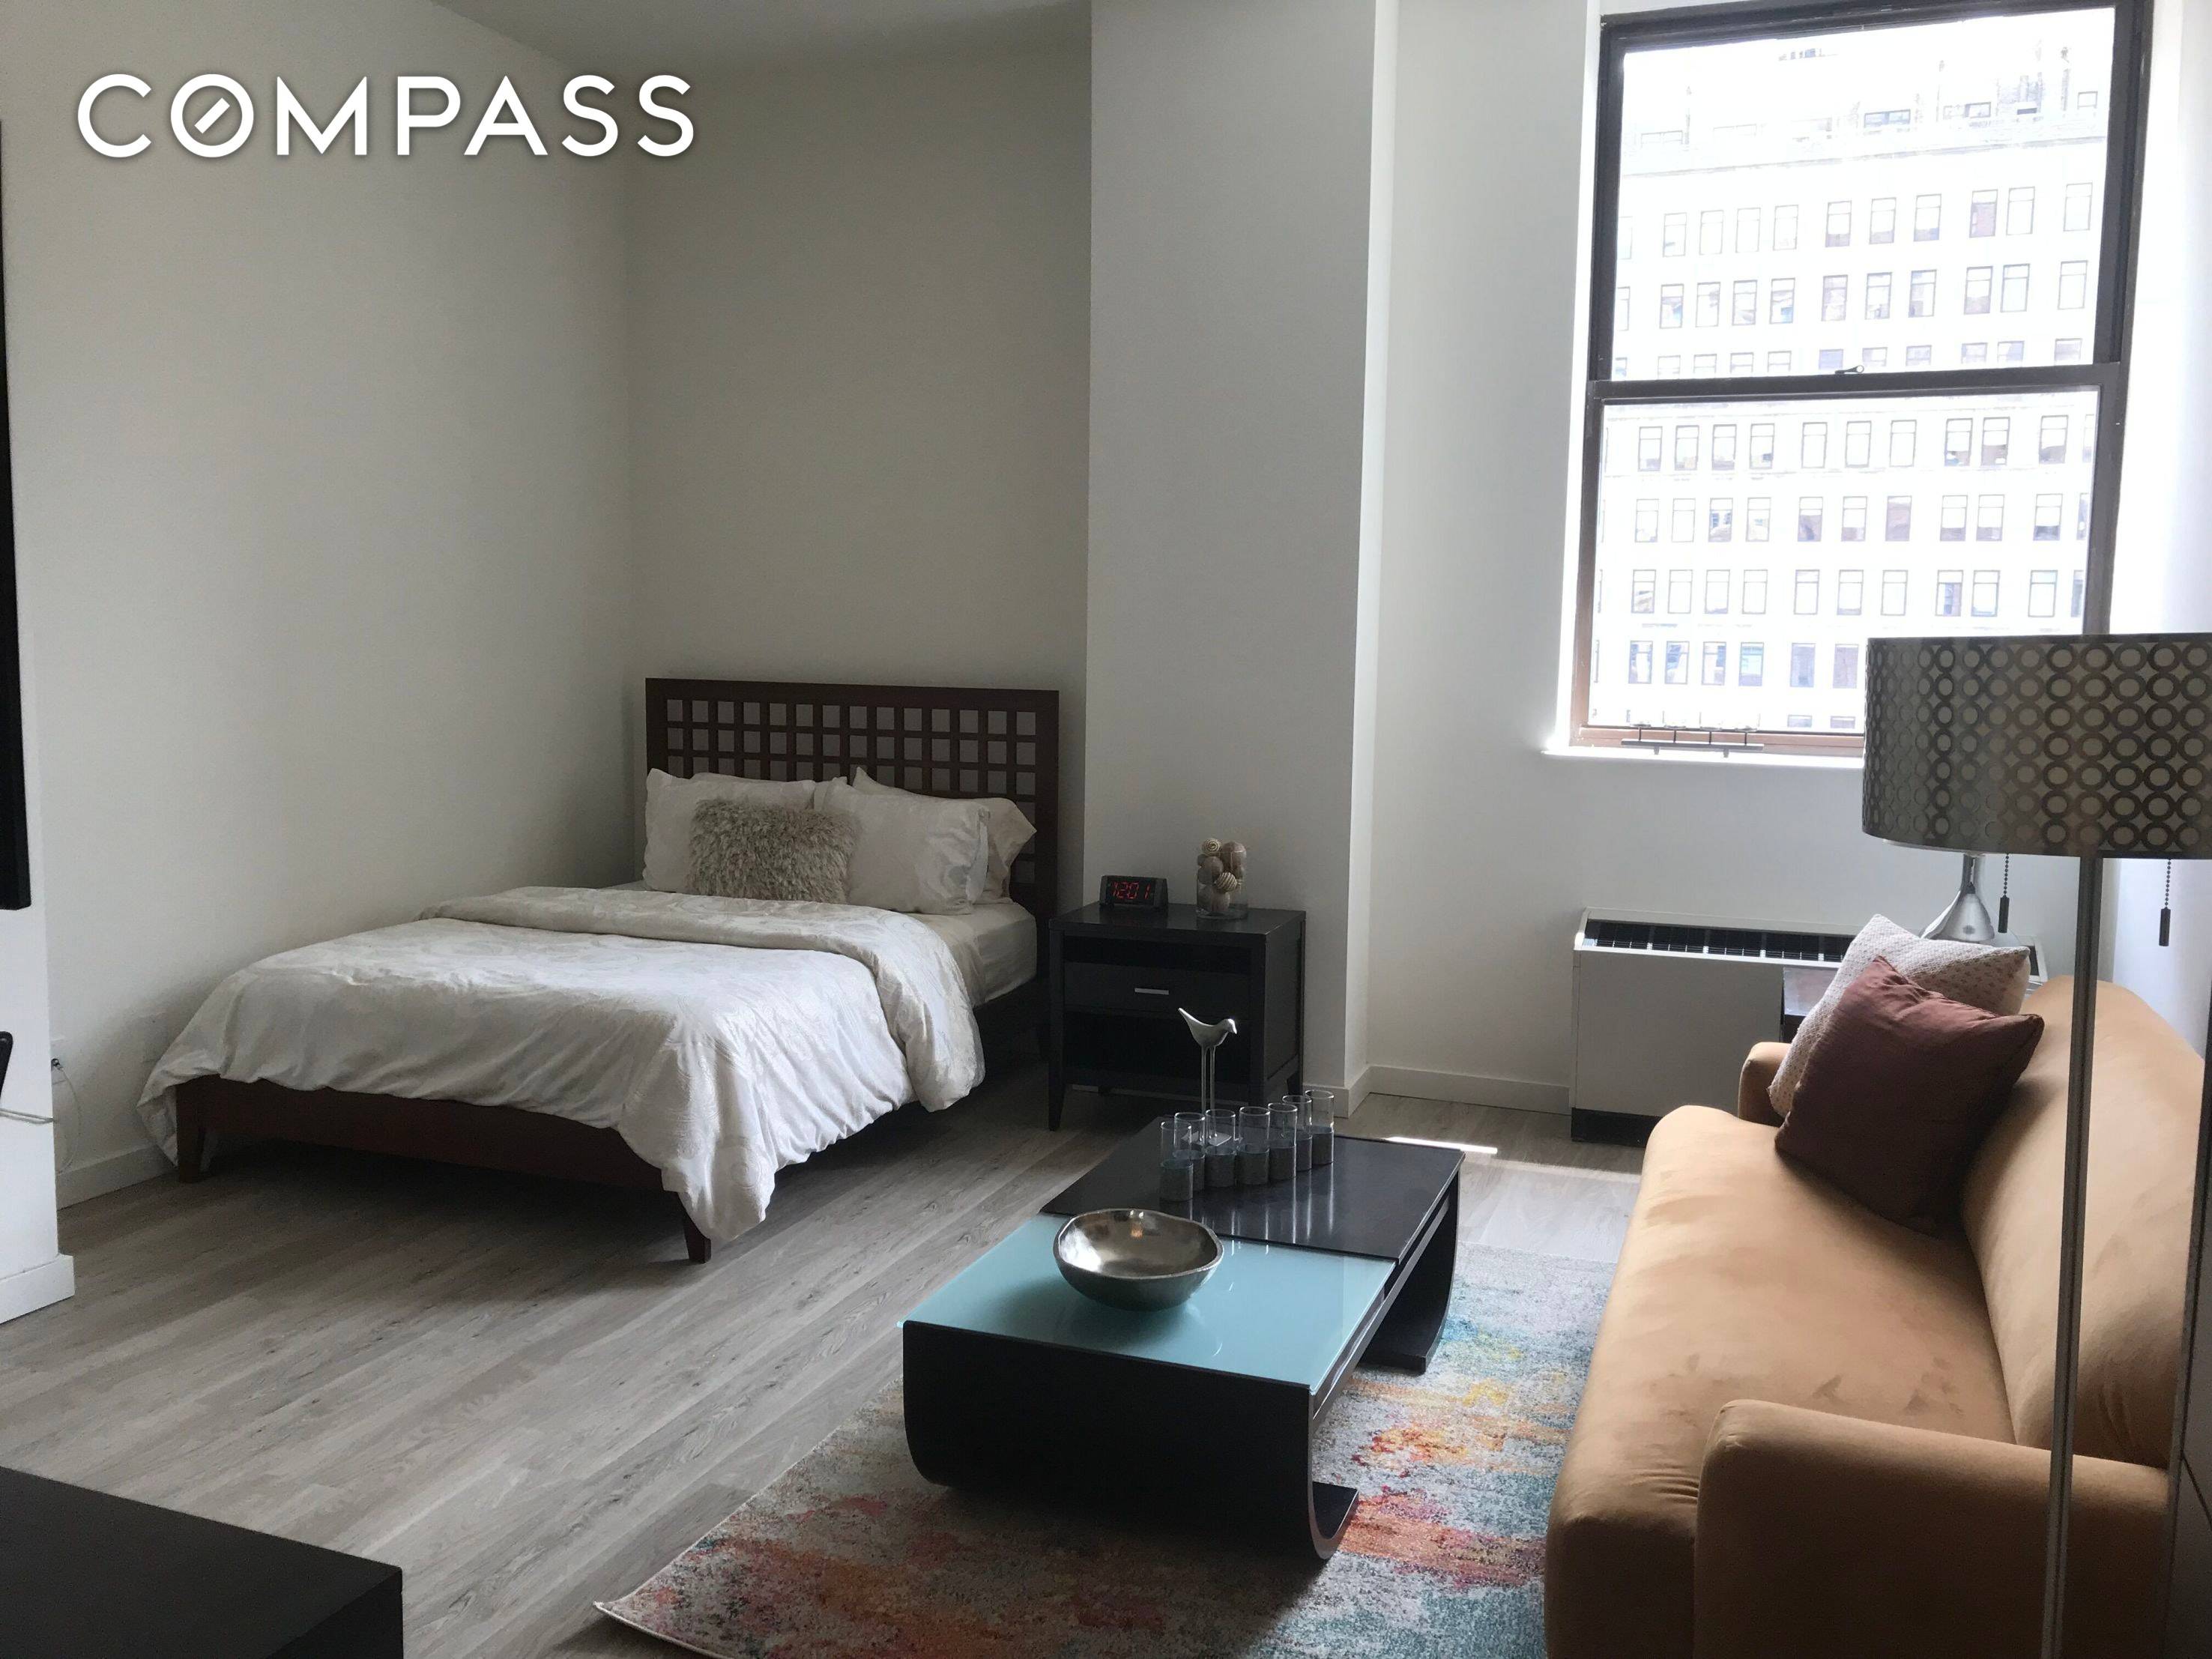 Unit 22M is a loft like Studio apartment located in the full service Downtown Club.